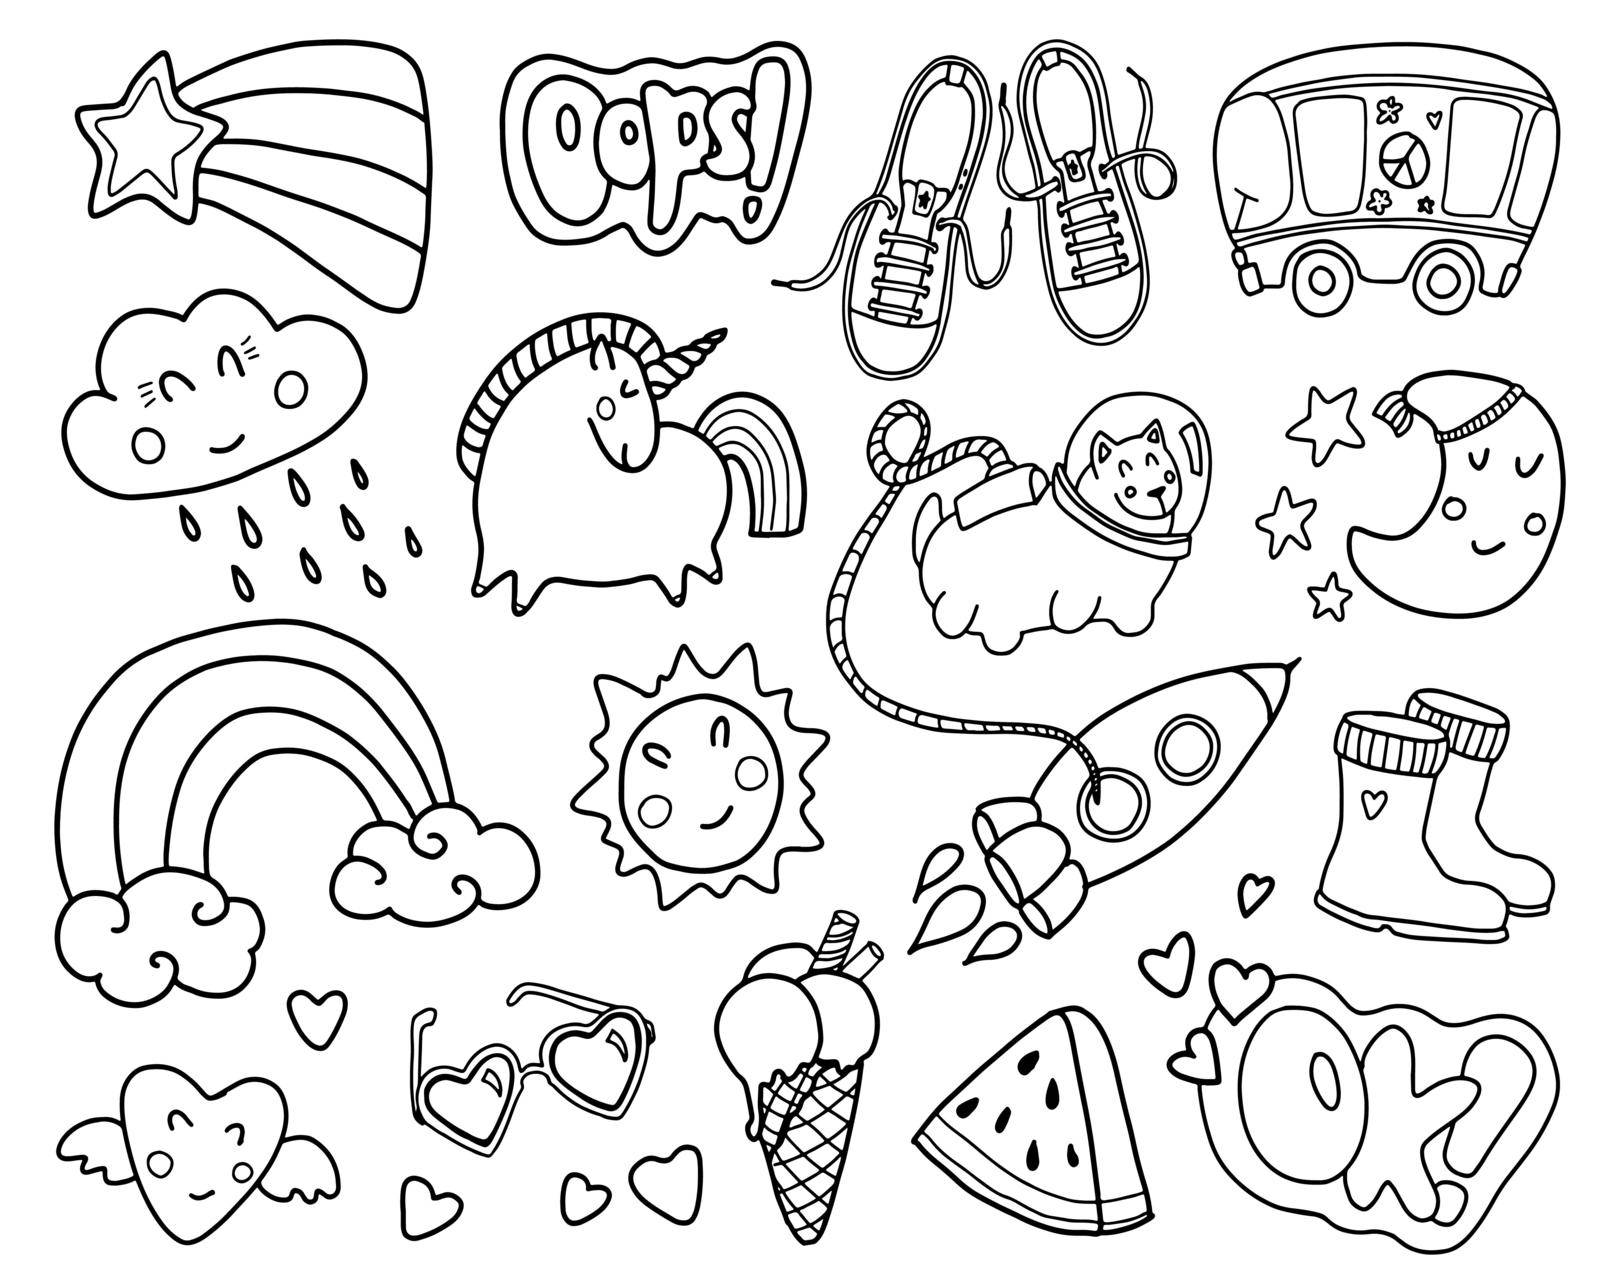 Set of girly graffiti doodles for decoration, stickers or embroidery. Cartoon patch badges or fashion pin badges. Vector by Lazy_Stocker